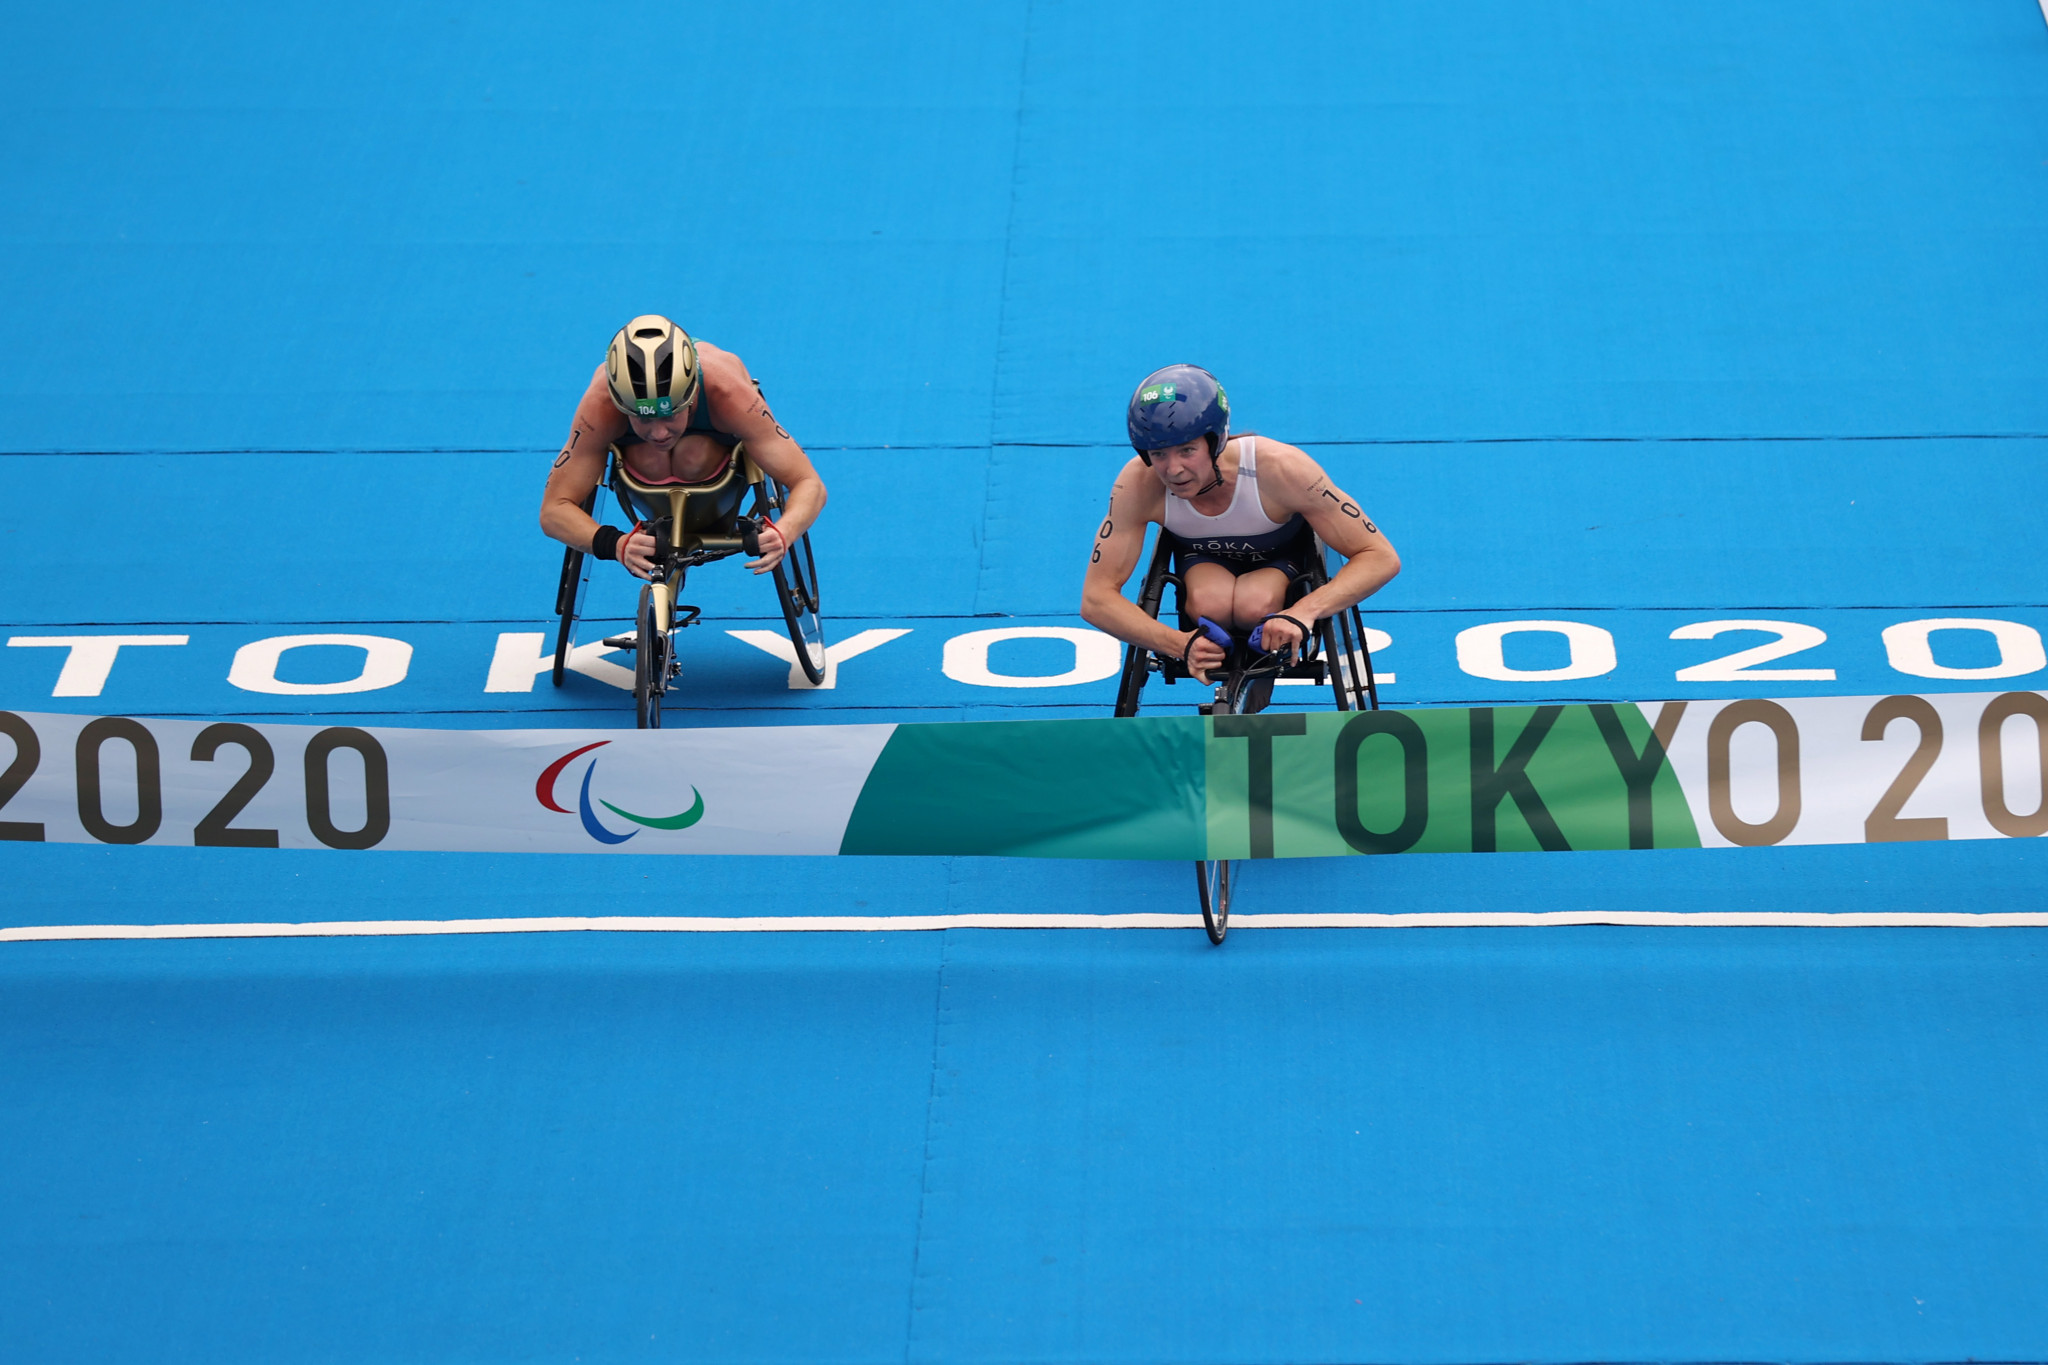 Biathlon gold medallist Kendall Gretsch of the United States won summer Paralympic gold in the Women's PTWC triathlon, defeating Australia's defending world champion Lauren Parker on the line ©Getty Images 